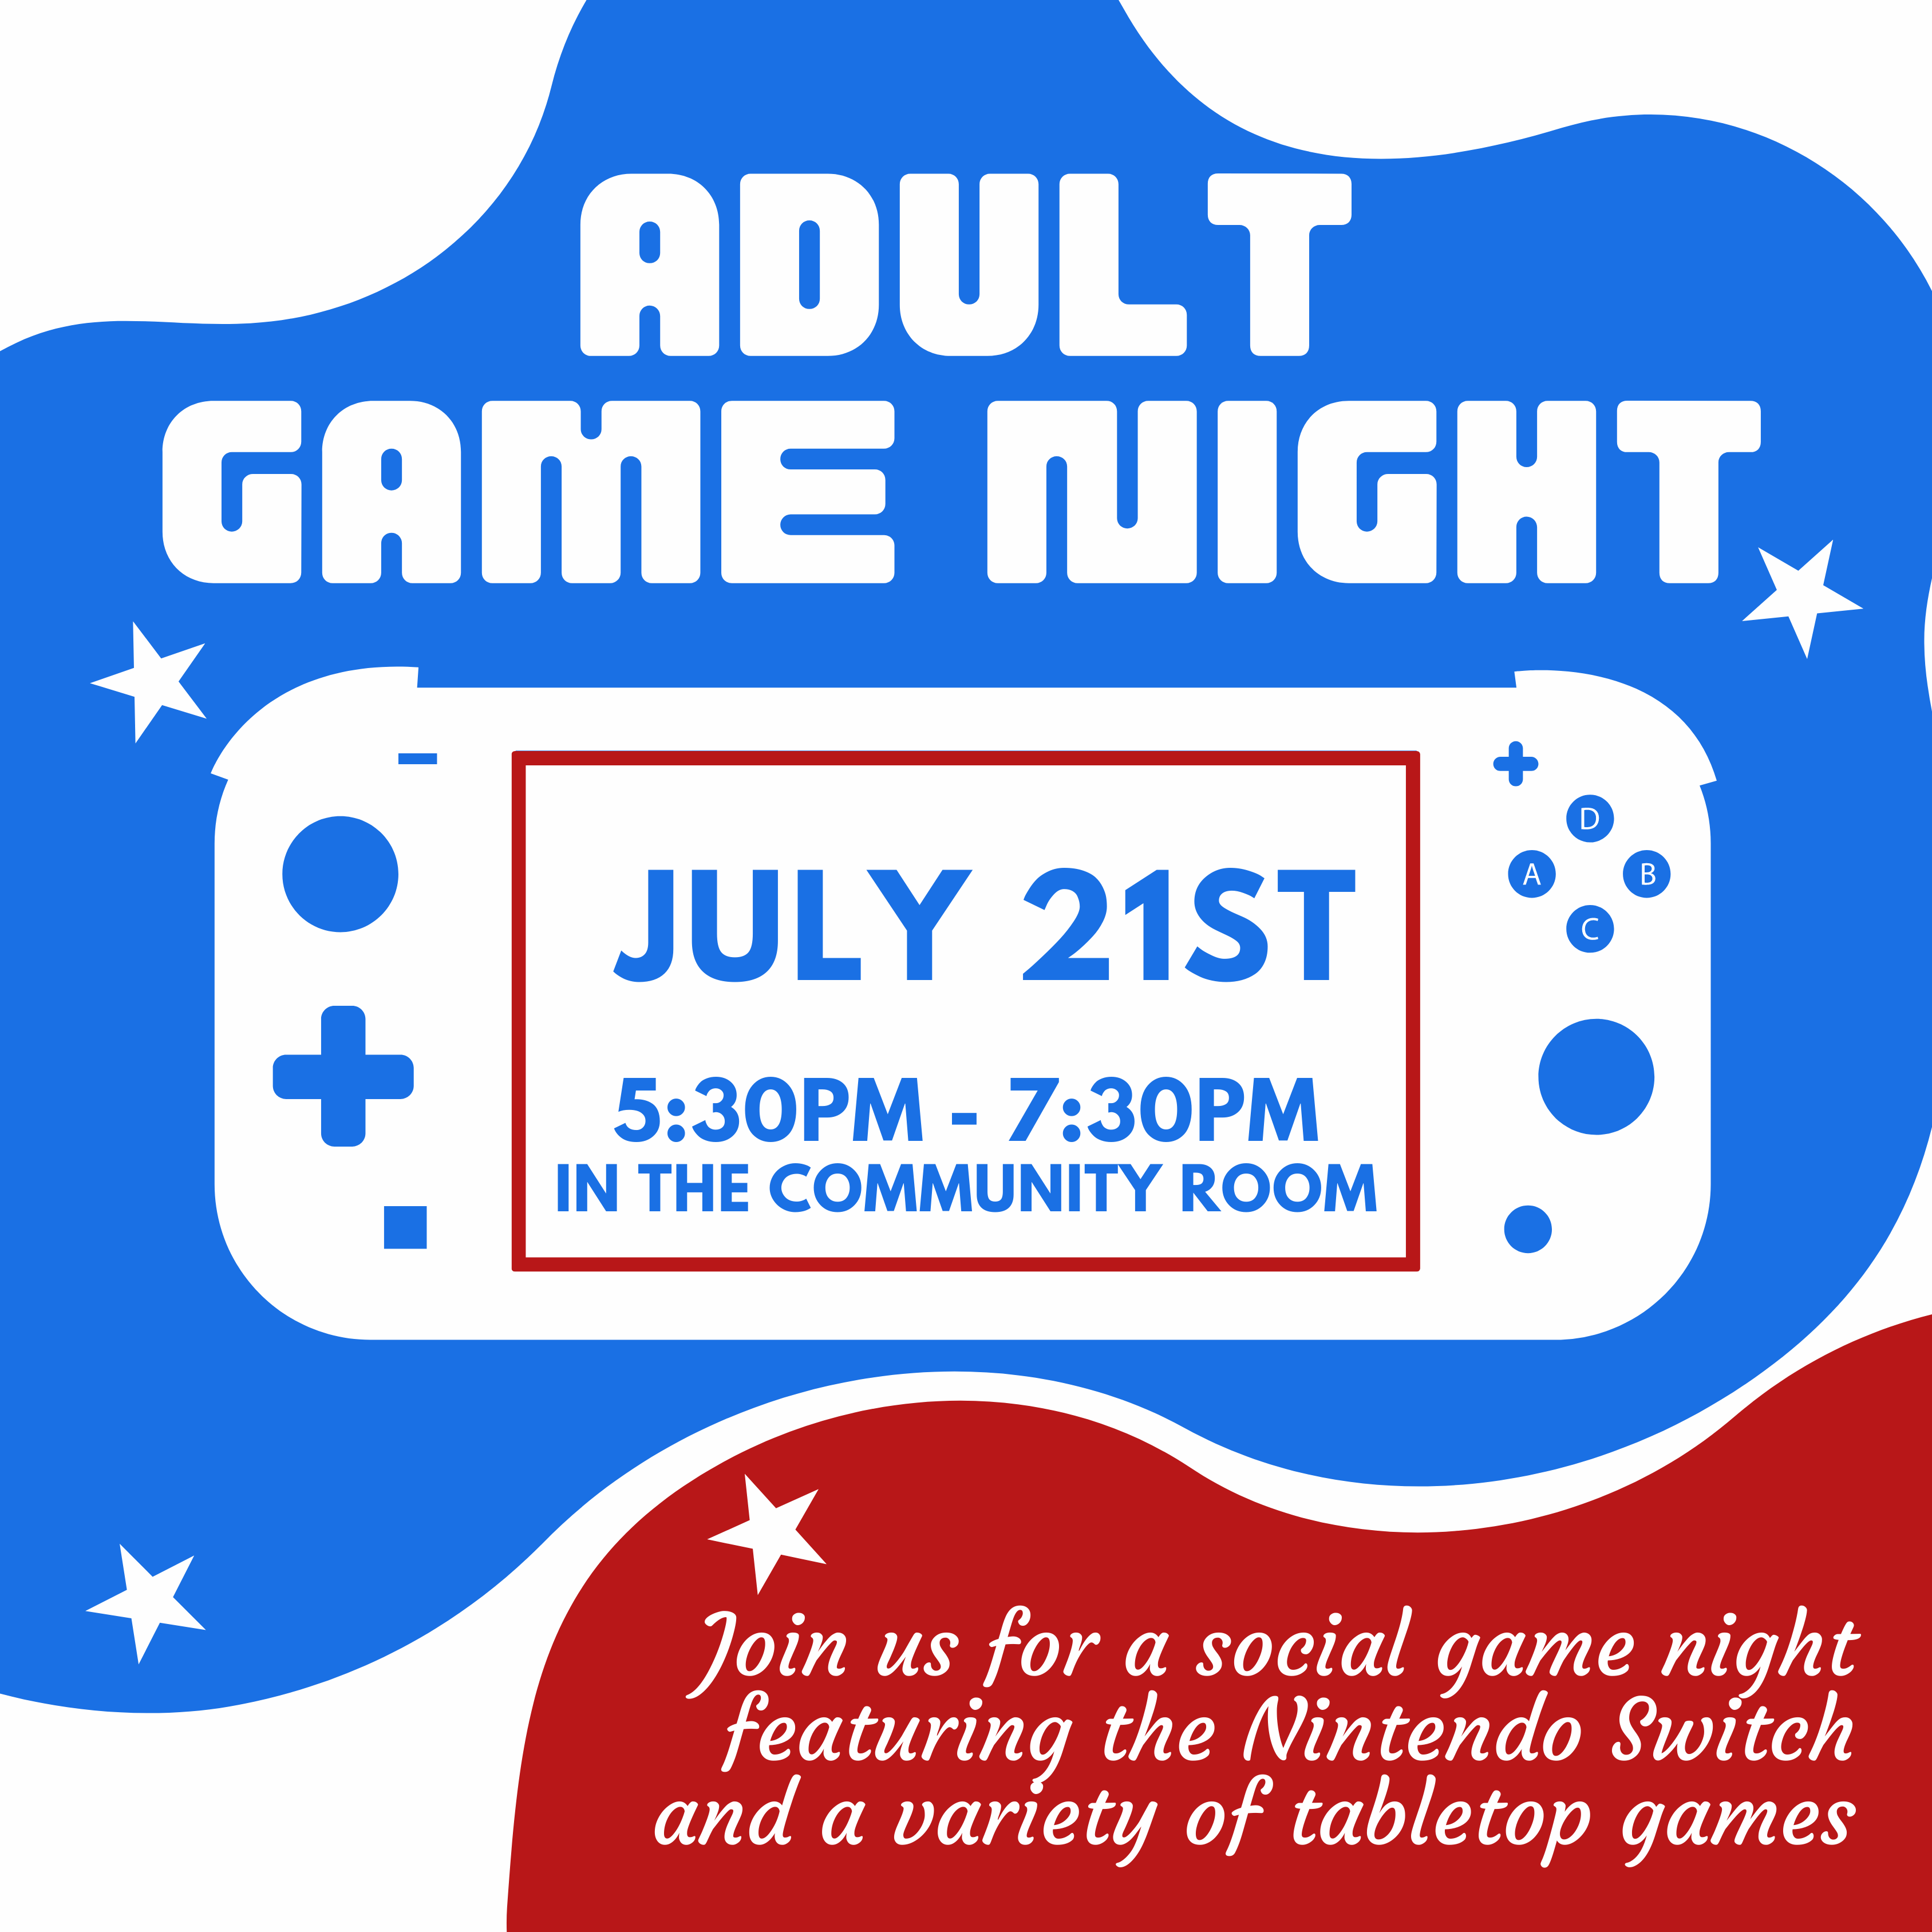 Video Game Night for adults 18+. July 21st  from 5:30PM to 7:30PM In the community room. Join us for a social game night featuring the Nintendo Switch and a variety of tabletop games.